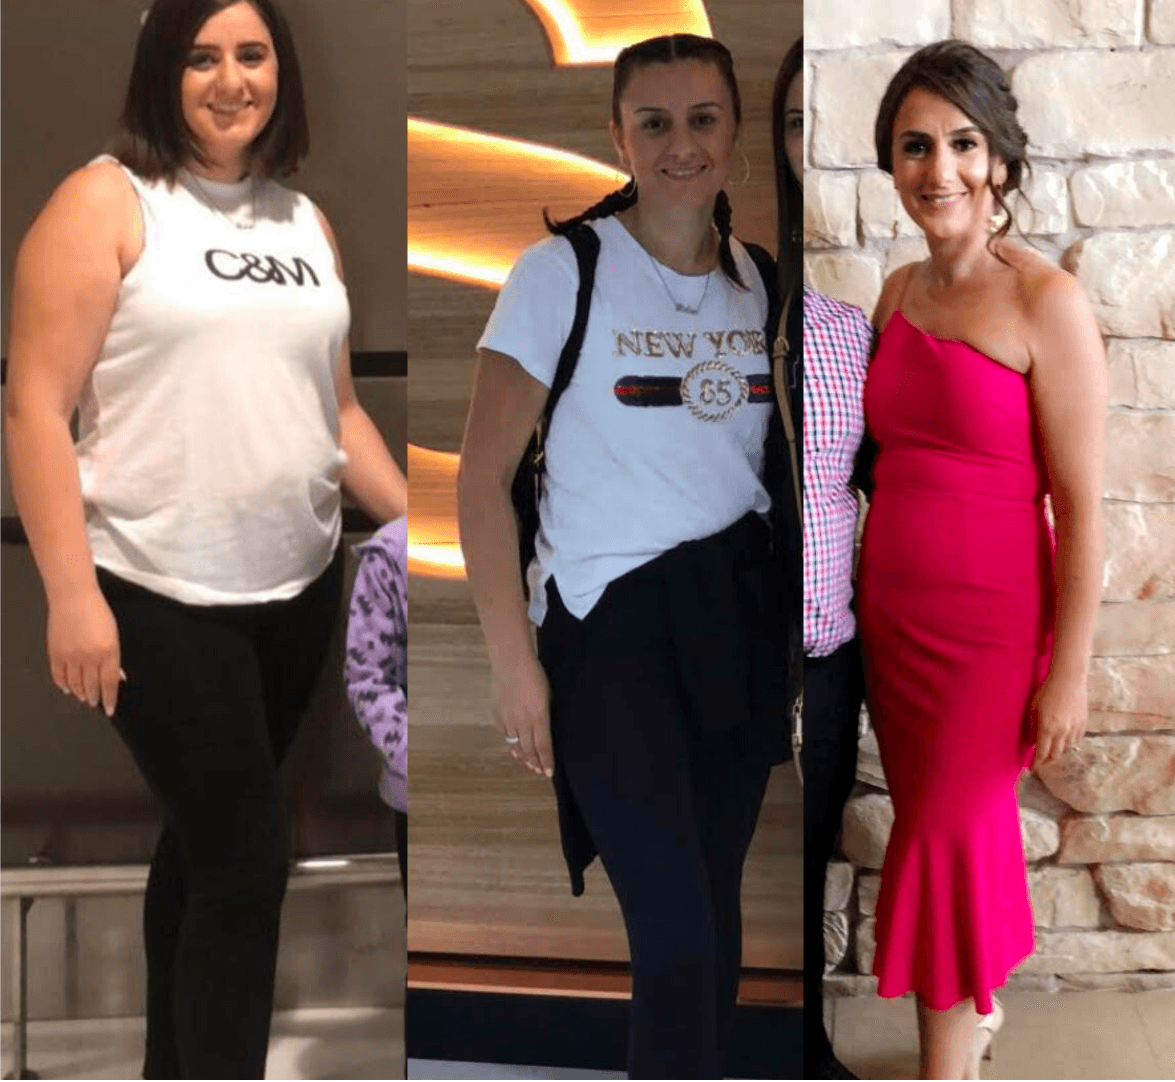 Helen lost 26kg on her journey to be happier and confident in her own skin!